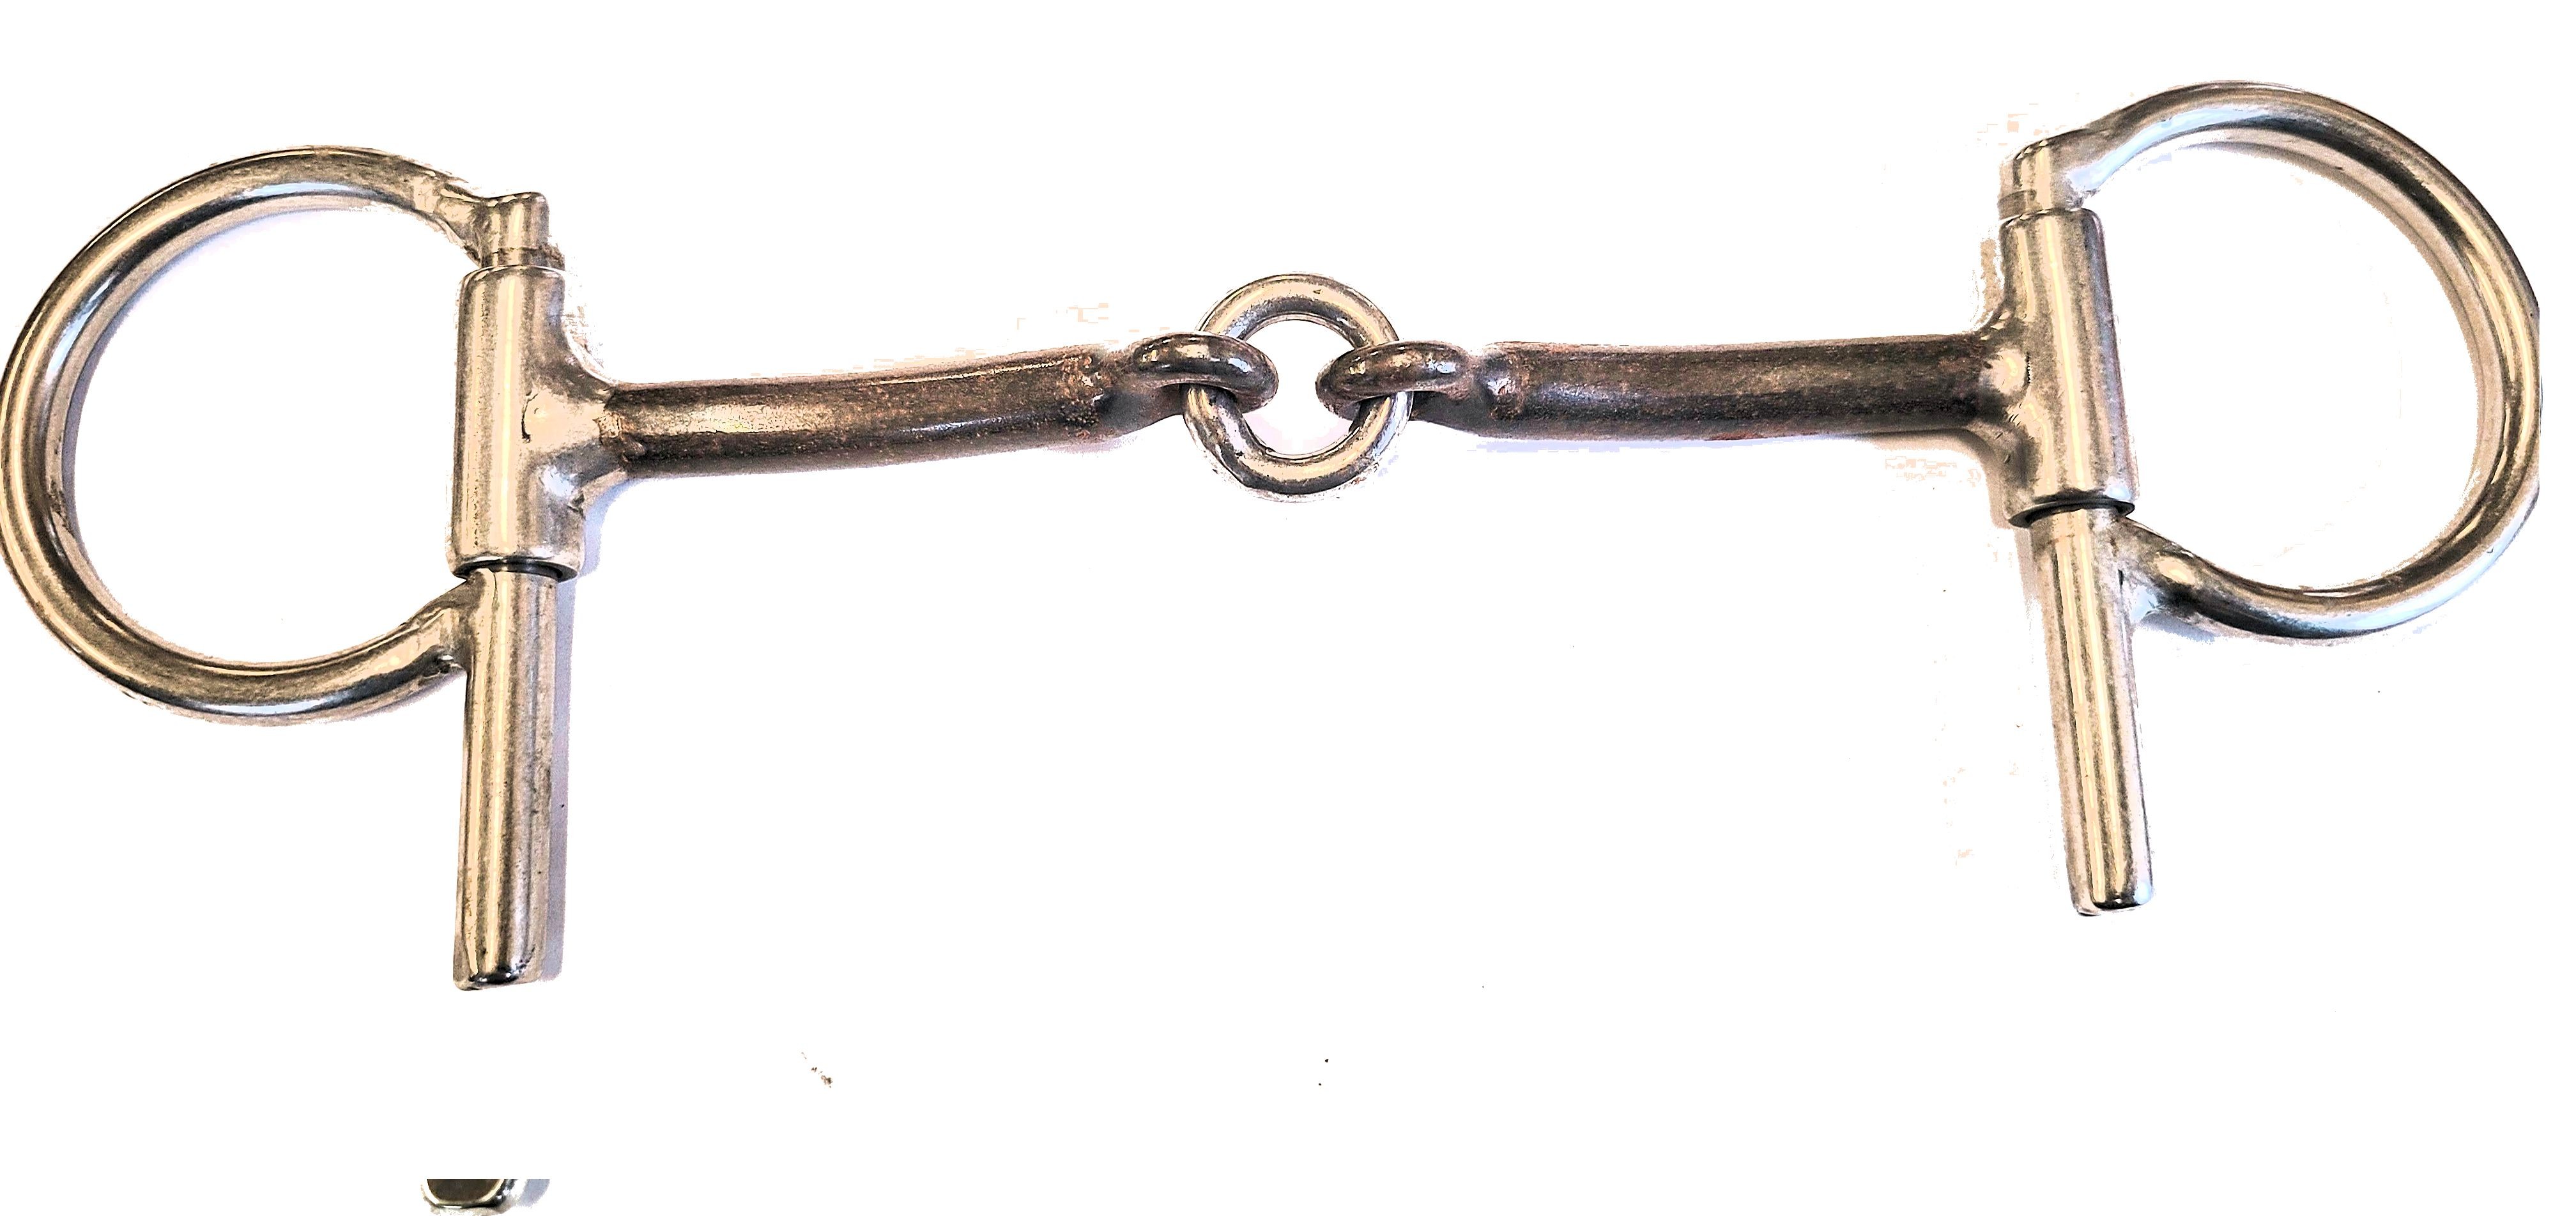 3/8" Smooth Bars with Life Saver Center Ring